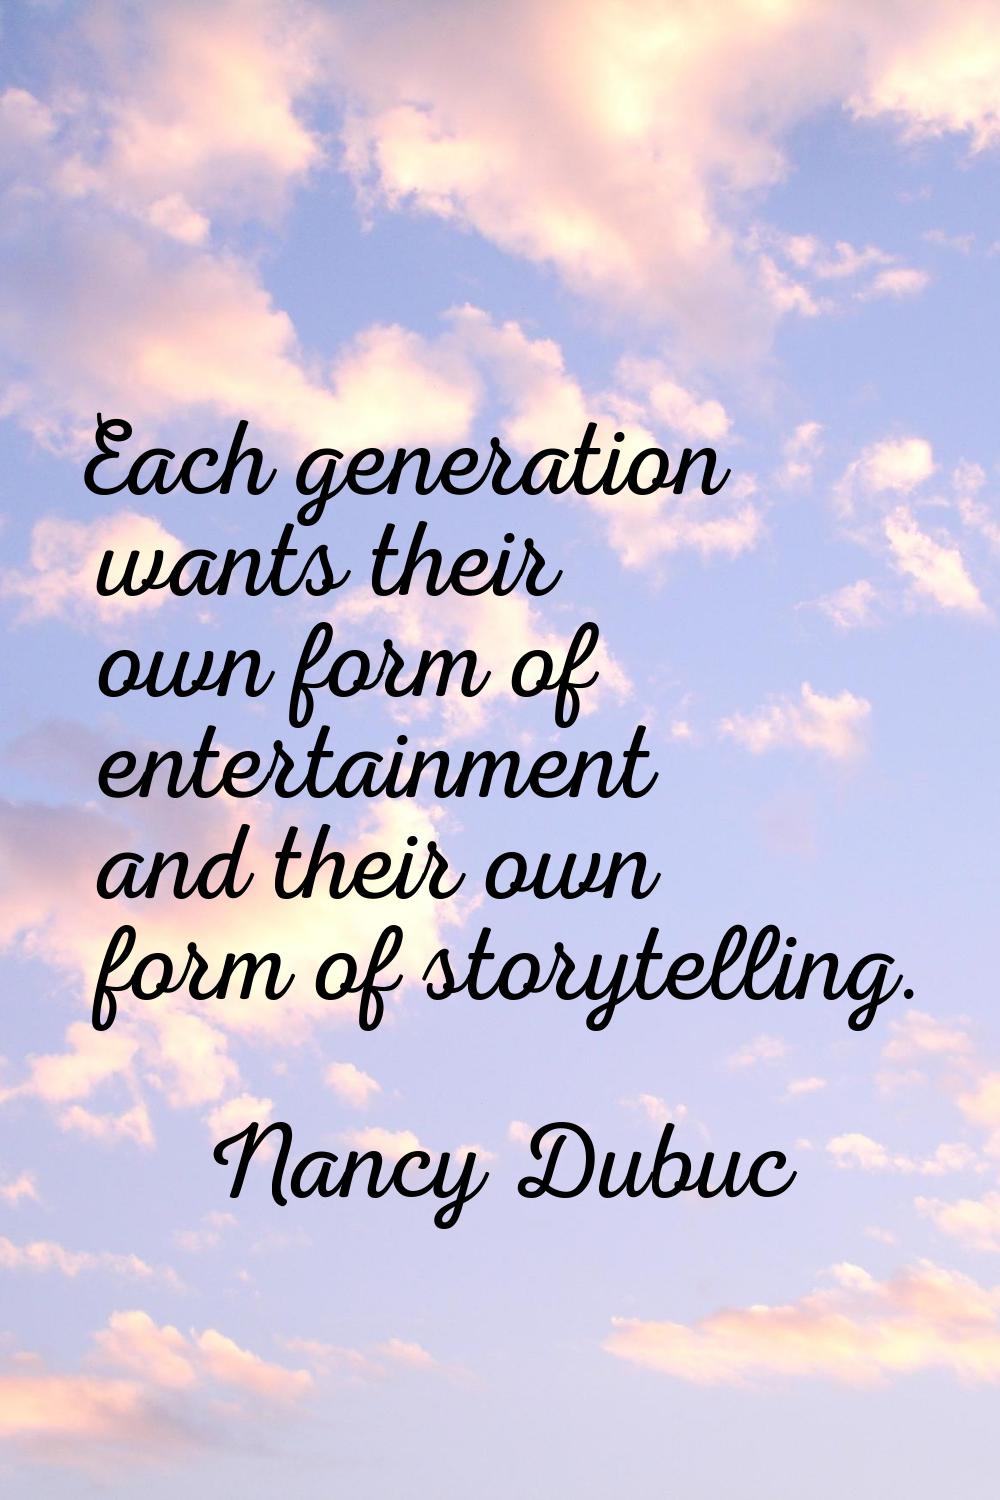 Each generation wants their own form of entertainment and their own form of storytelling.